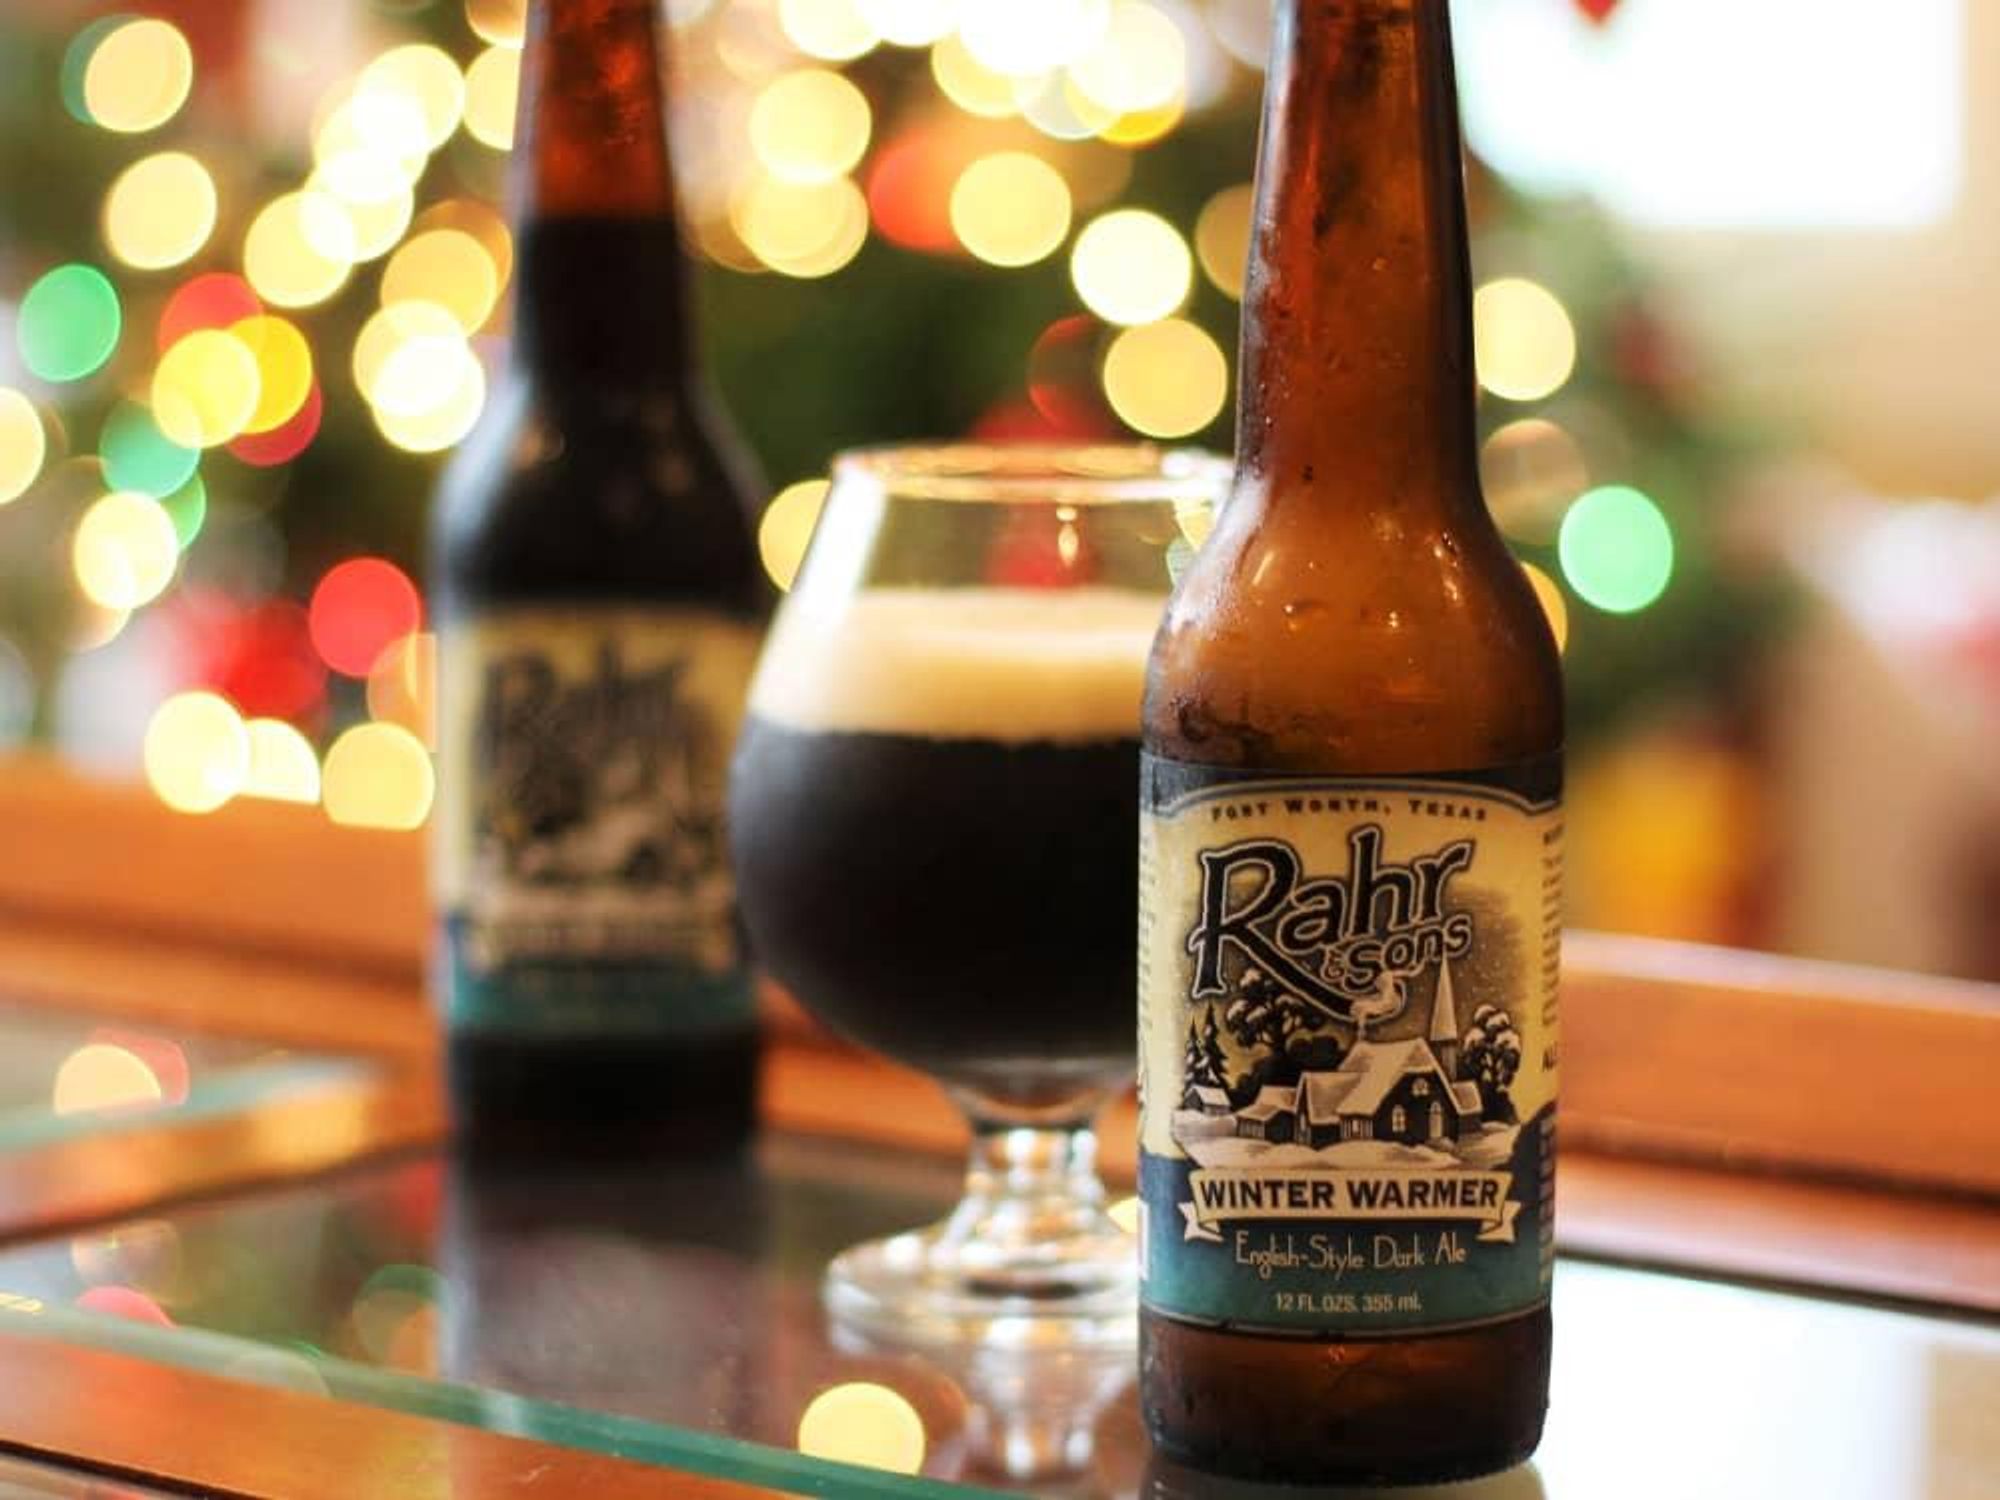 Rahr and Sons Winter Warmer